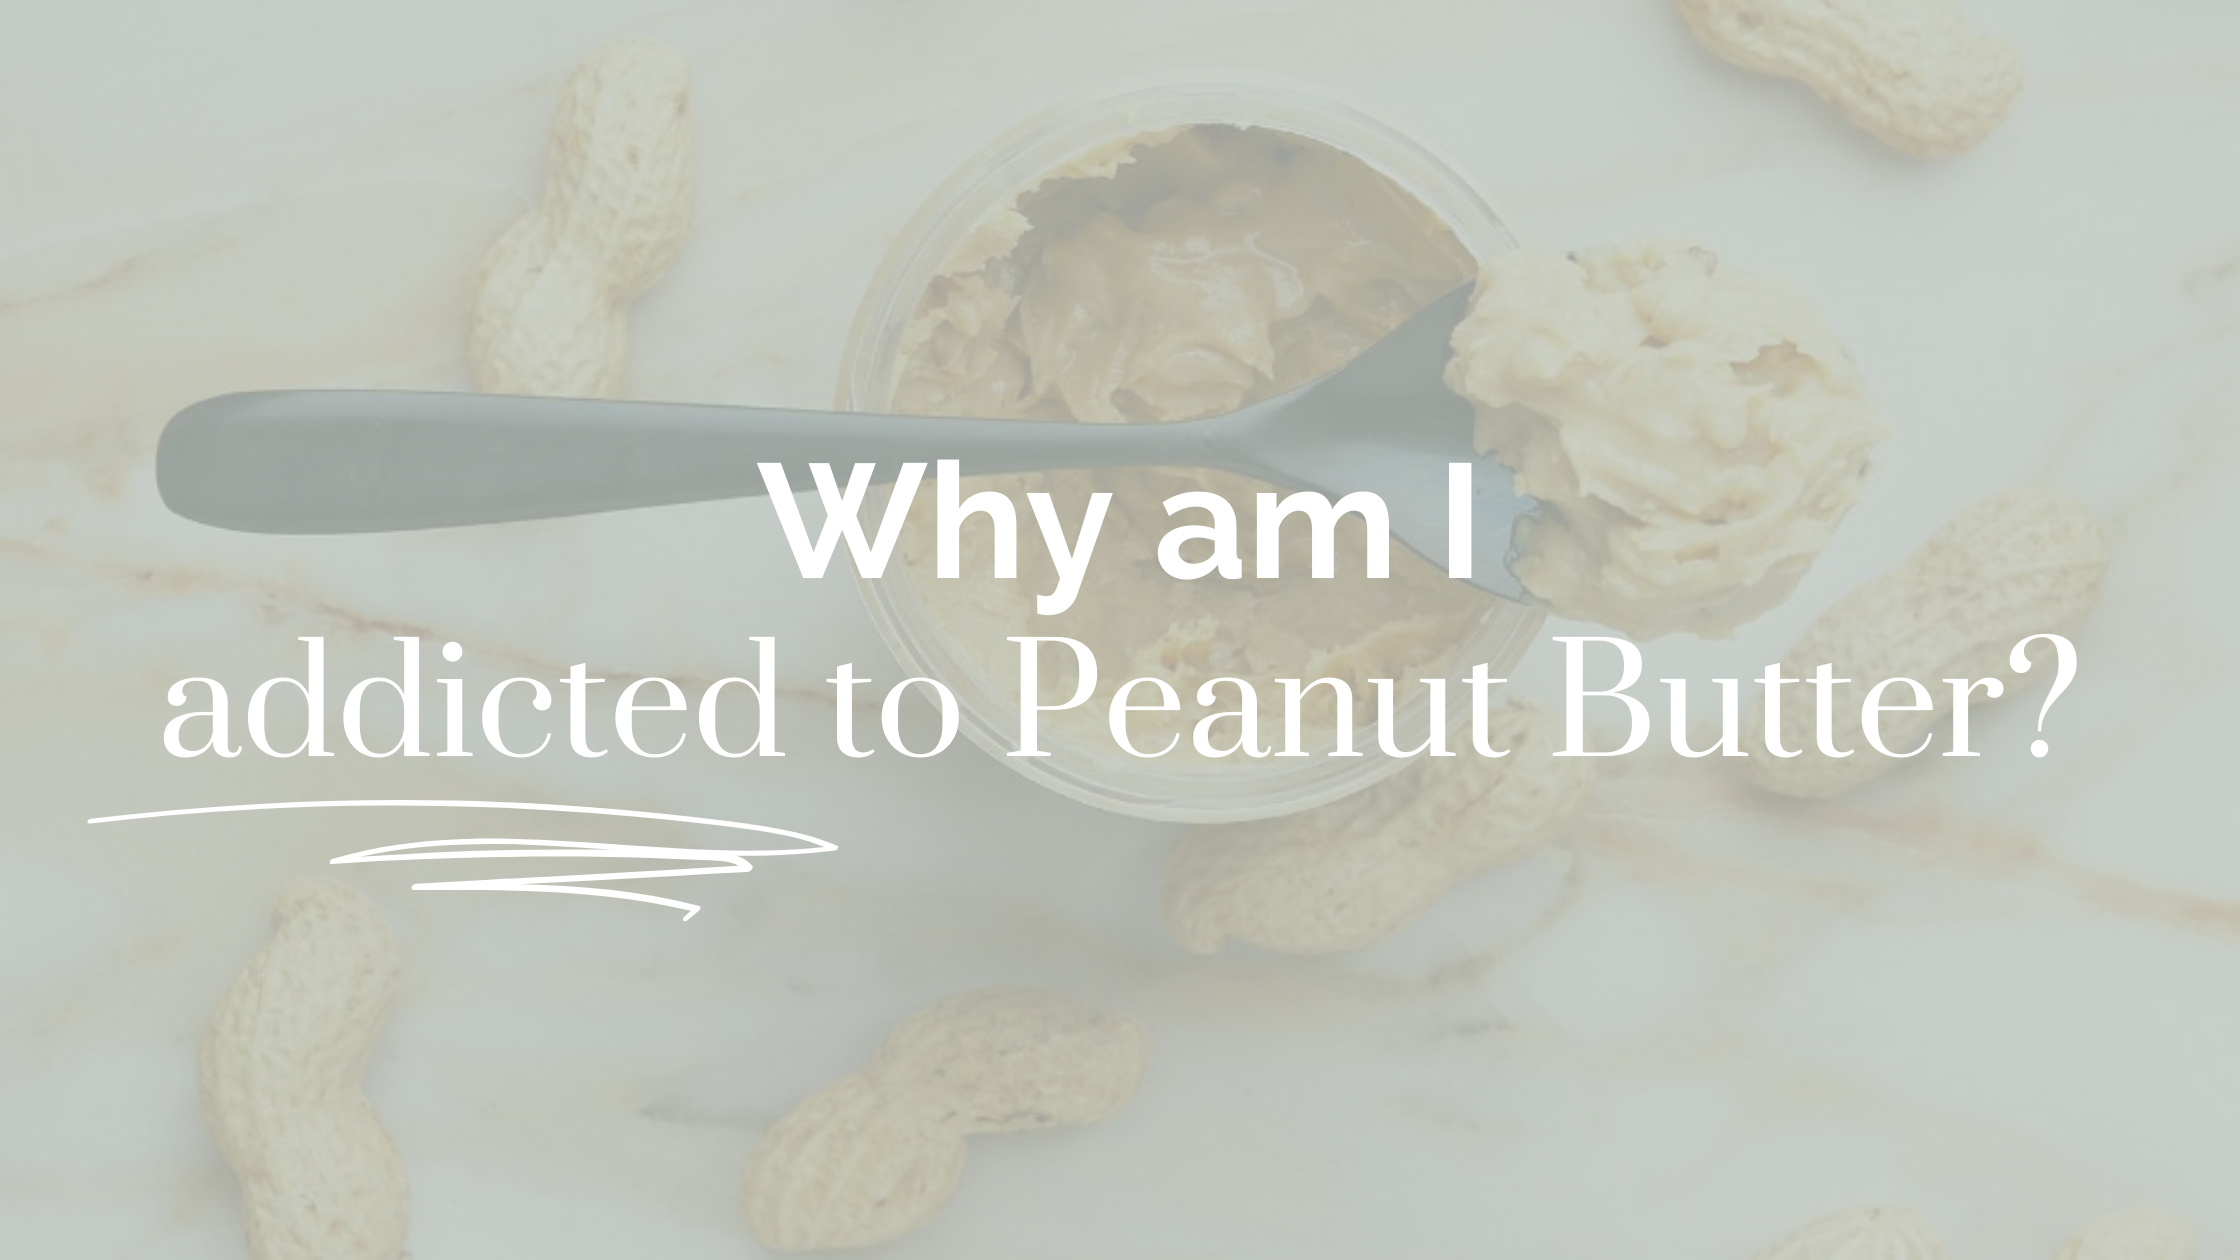 Peanut butter is a source of healthy fats - and yum to boot. Image: Unsplash